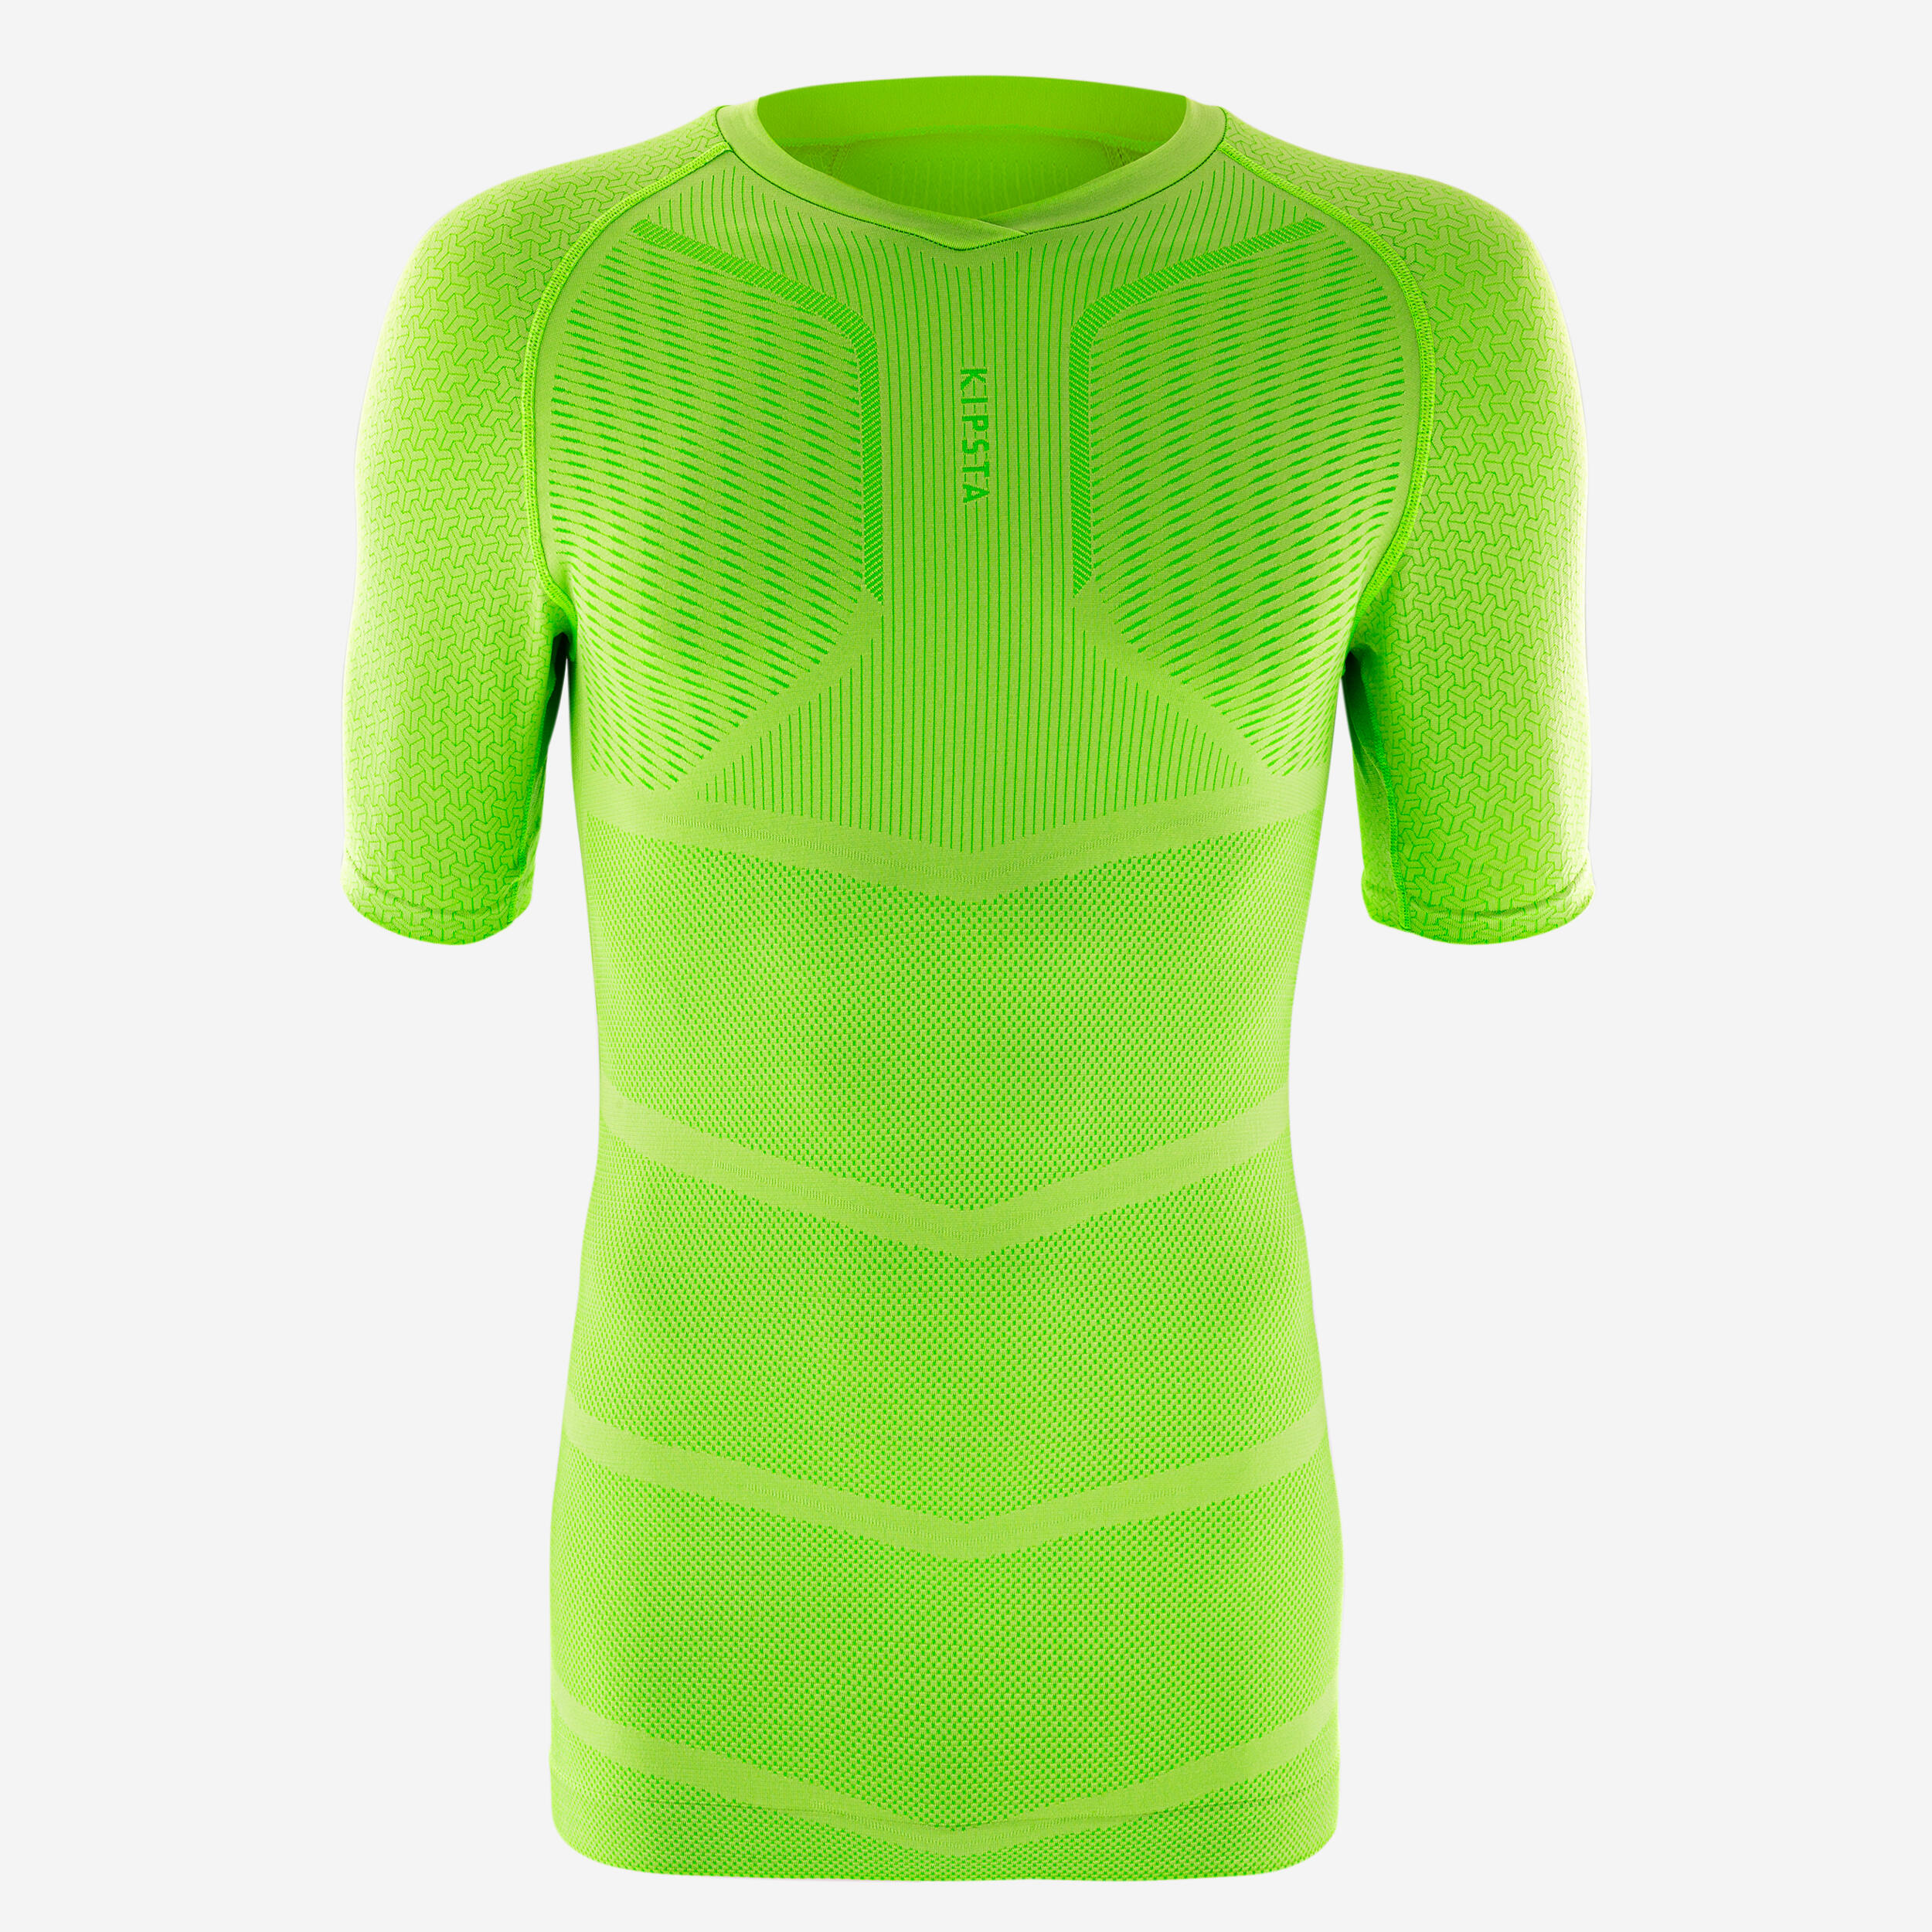 Adult Short-Sleeved Thermal Base Layer Top Keepdry - Aniseed 2/5